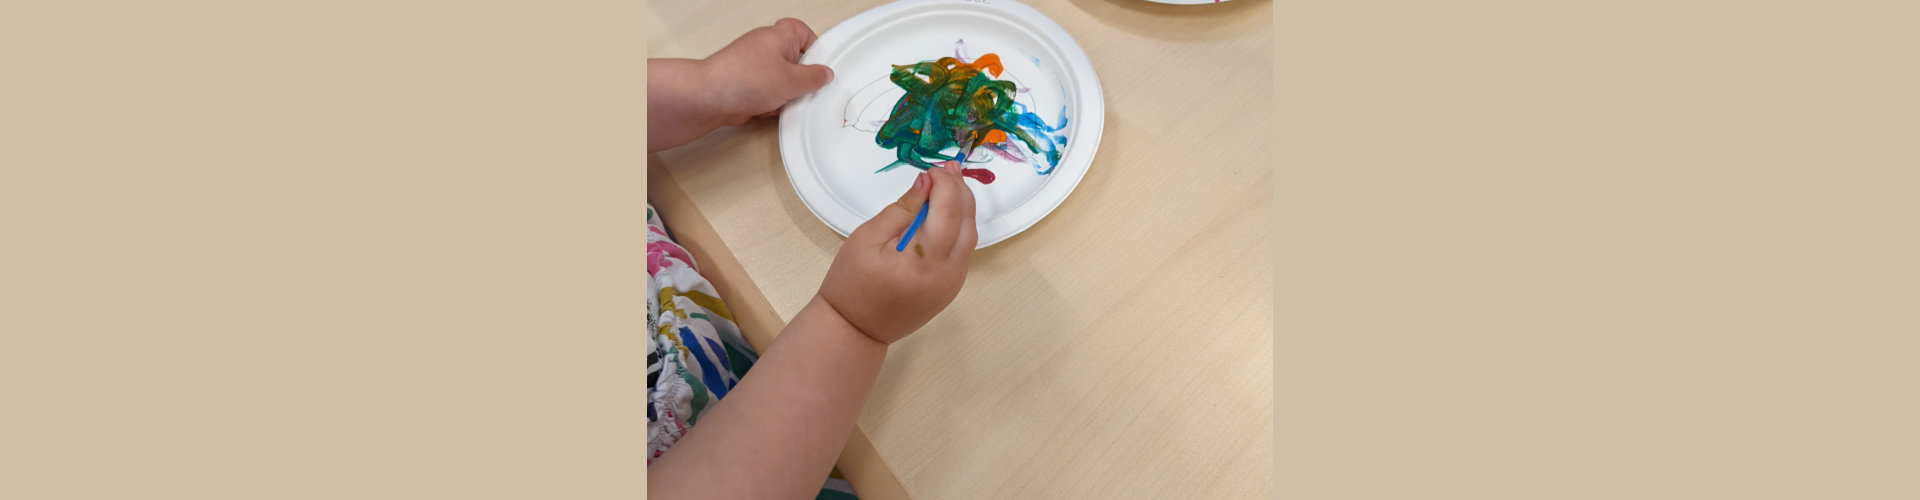 baby playing colors on plate